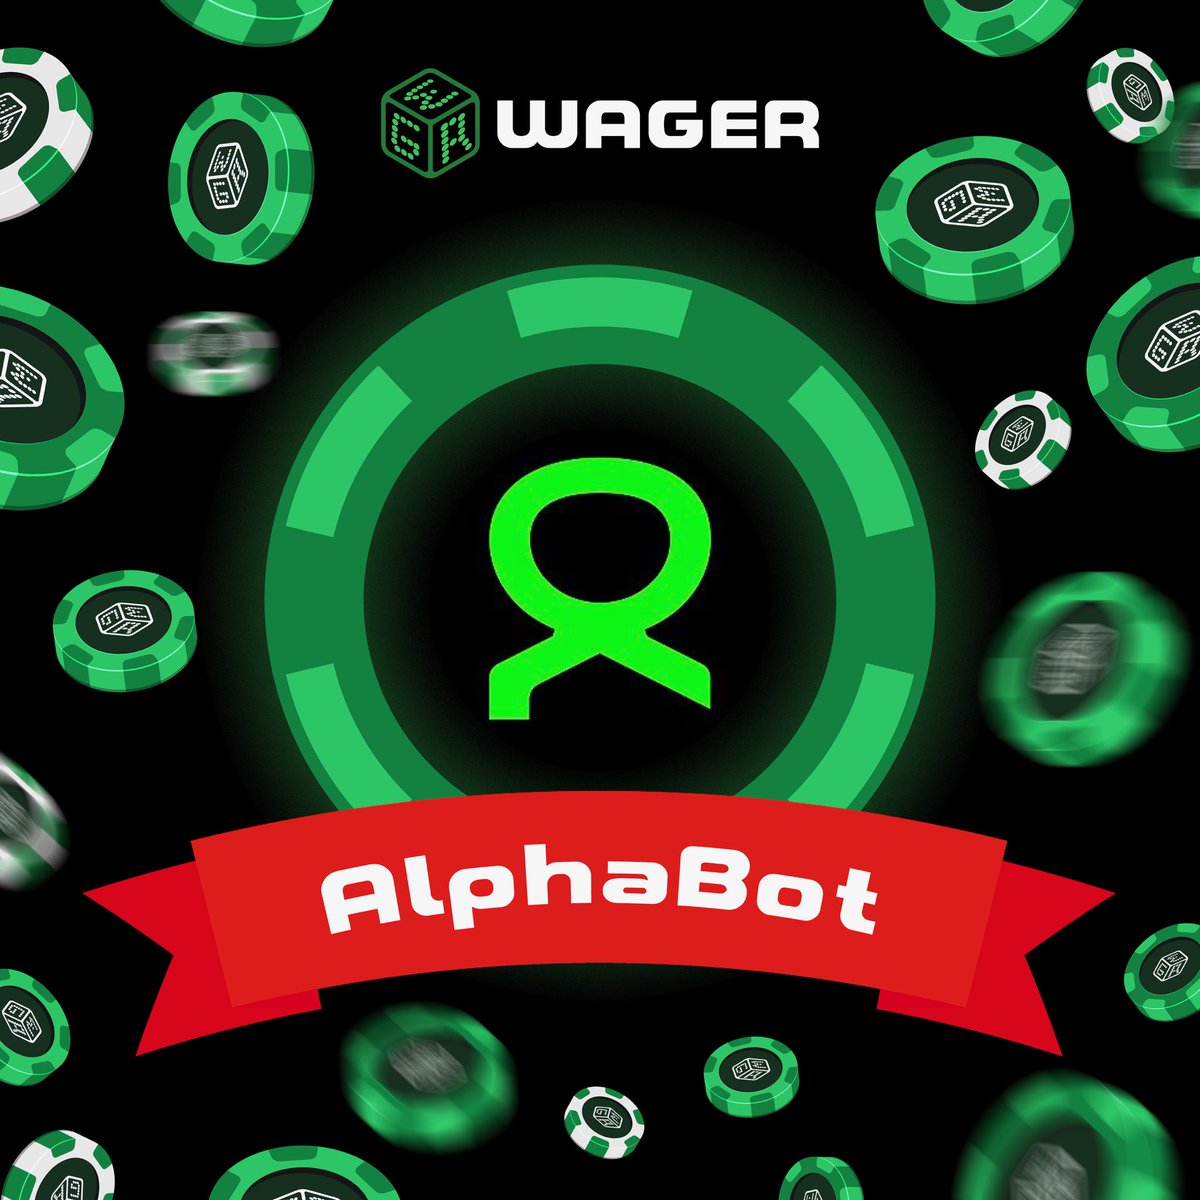 Alphabot is excited to announce an official partnership with @wagerdotgg A platform that merges DeFi, Gamefi, & Gamblefi 🎁 To celebrate here is the VERY FIRST raffle for their 300 supply FREE MINT! alphabot.app/wager-1 More info about Wager below 👇